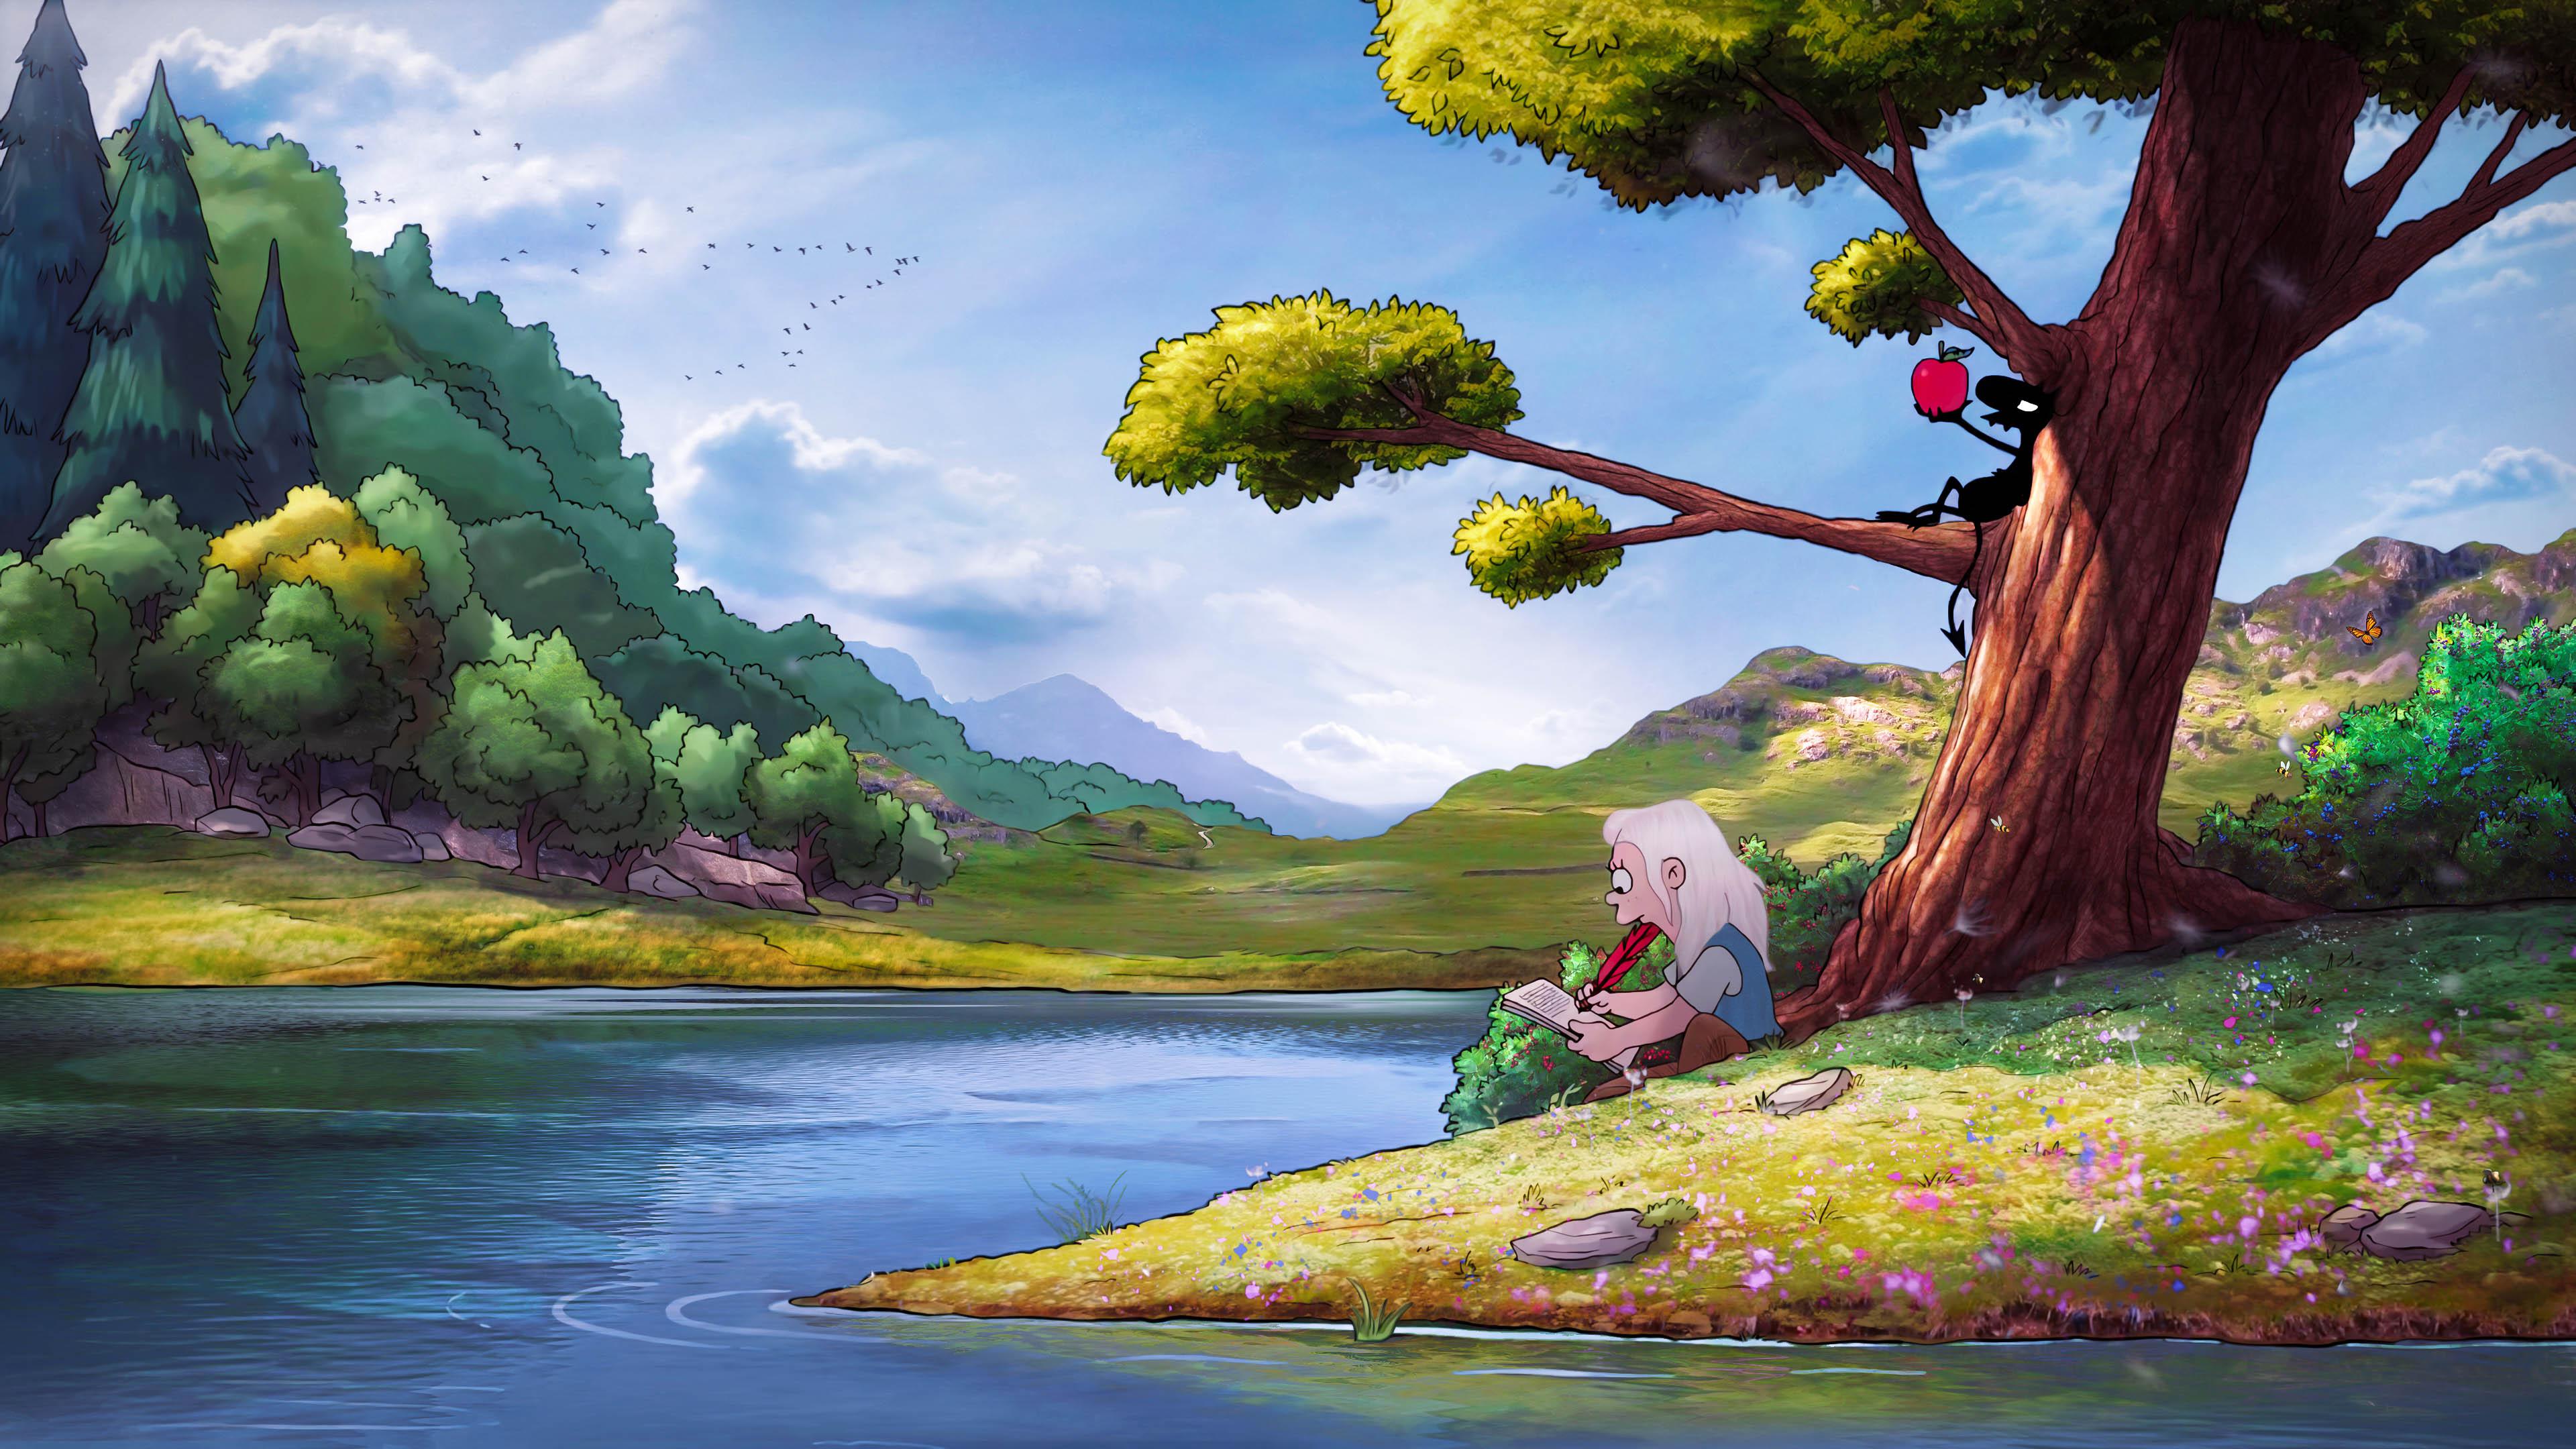 Disenchantment Luci Disenchantment Bean Disenchantment Lake Apples Birds Trees Forest Clouds Water N 3840x2160